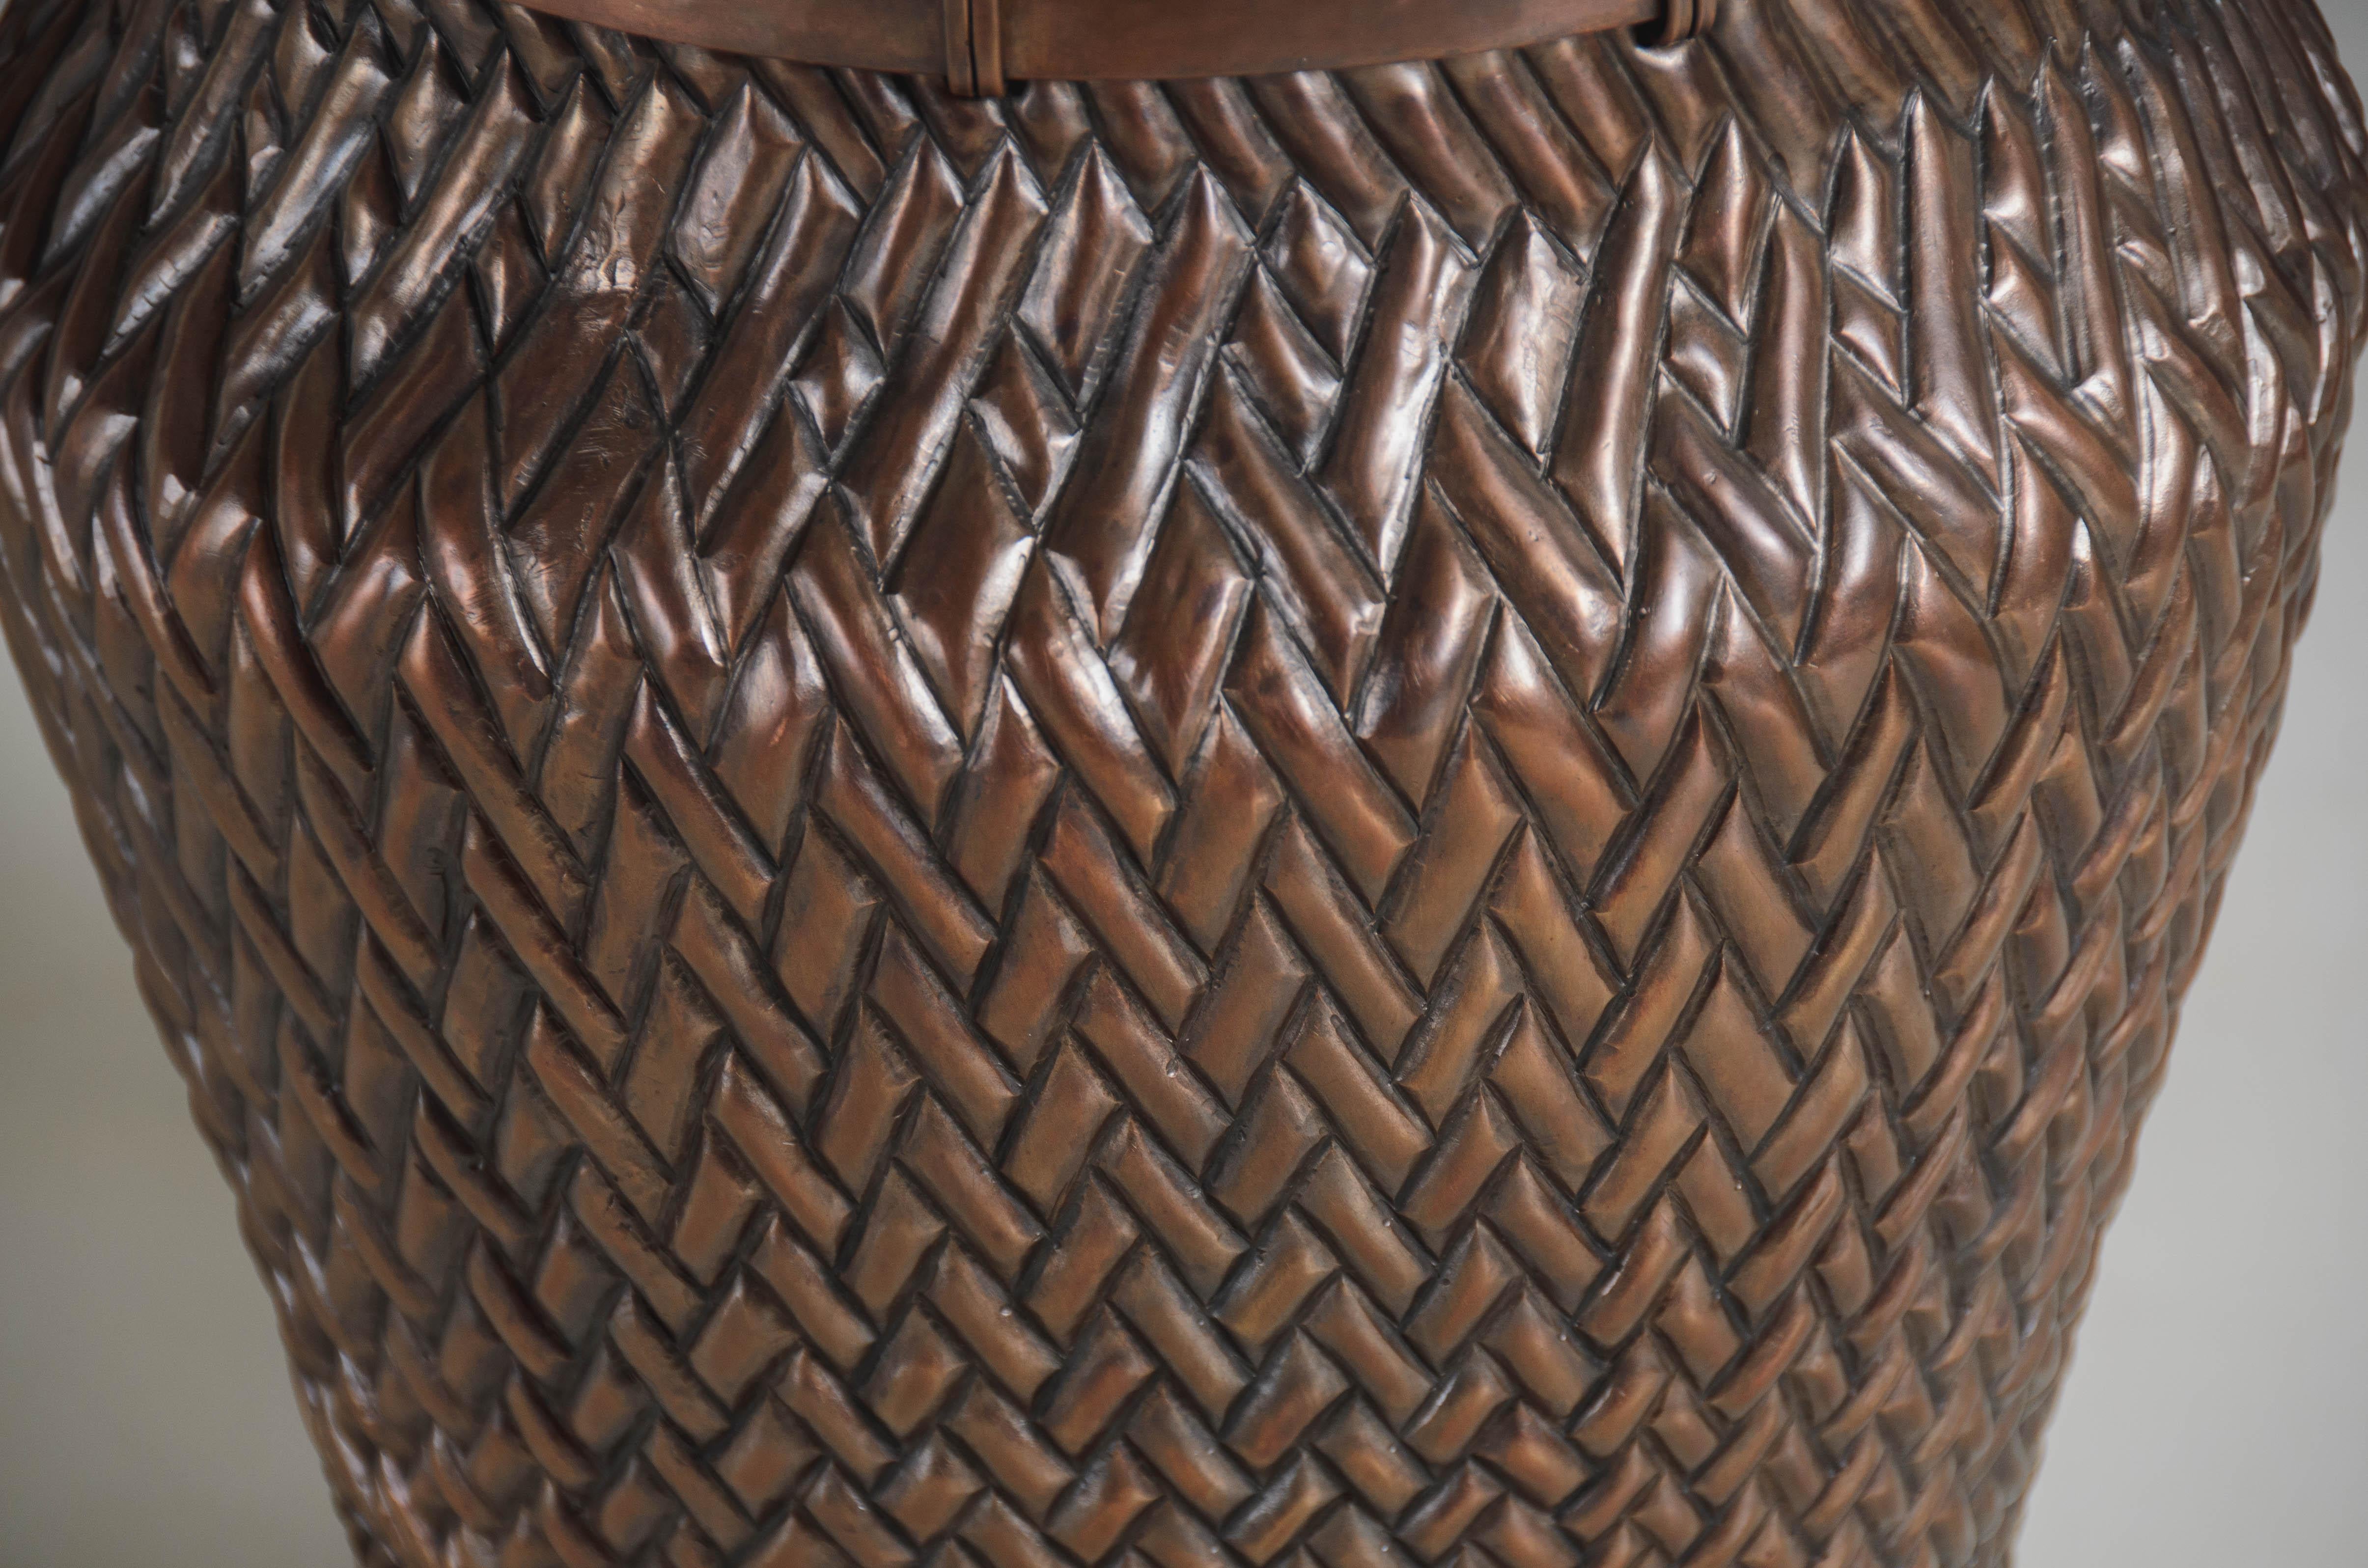 Repoussé Contemporary Weave Design Vase in Copper by Robert Kuo, Limited Edition For Sale